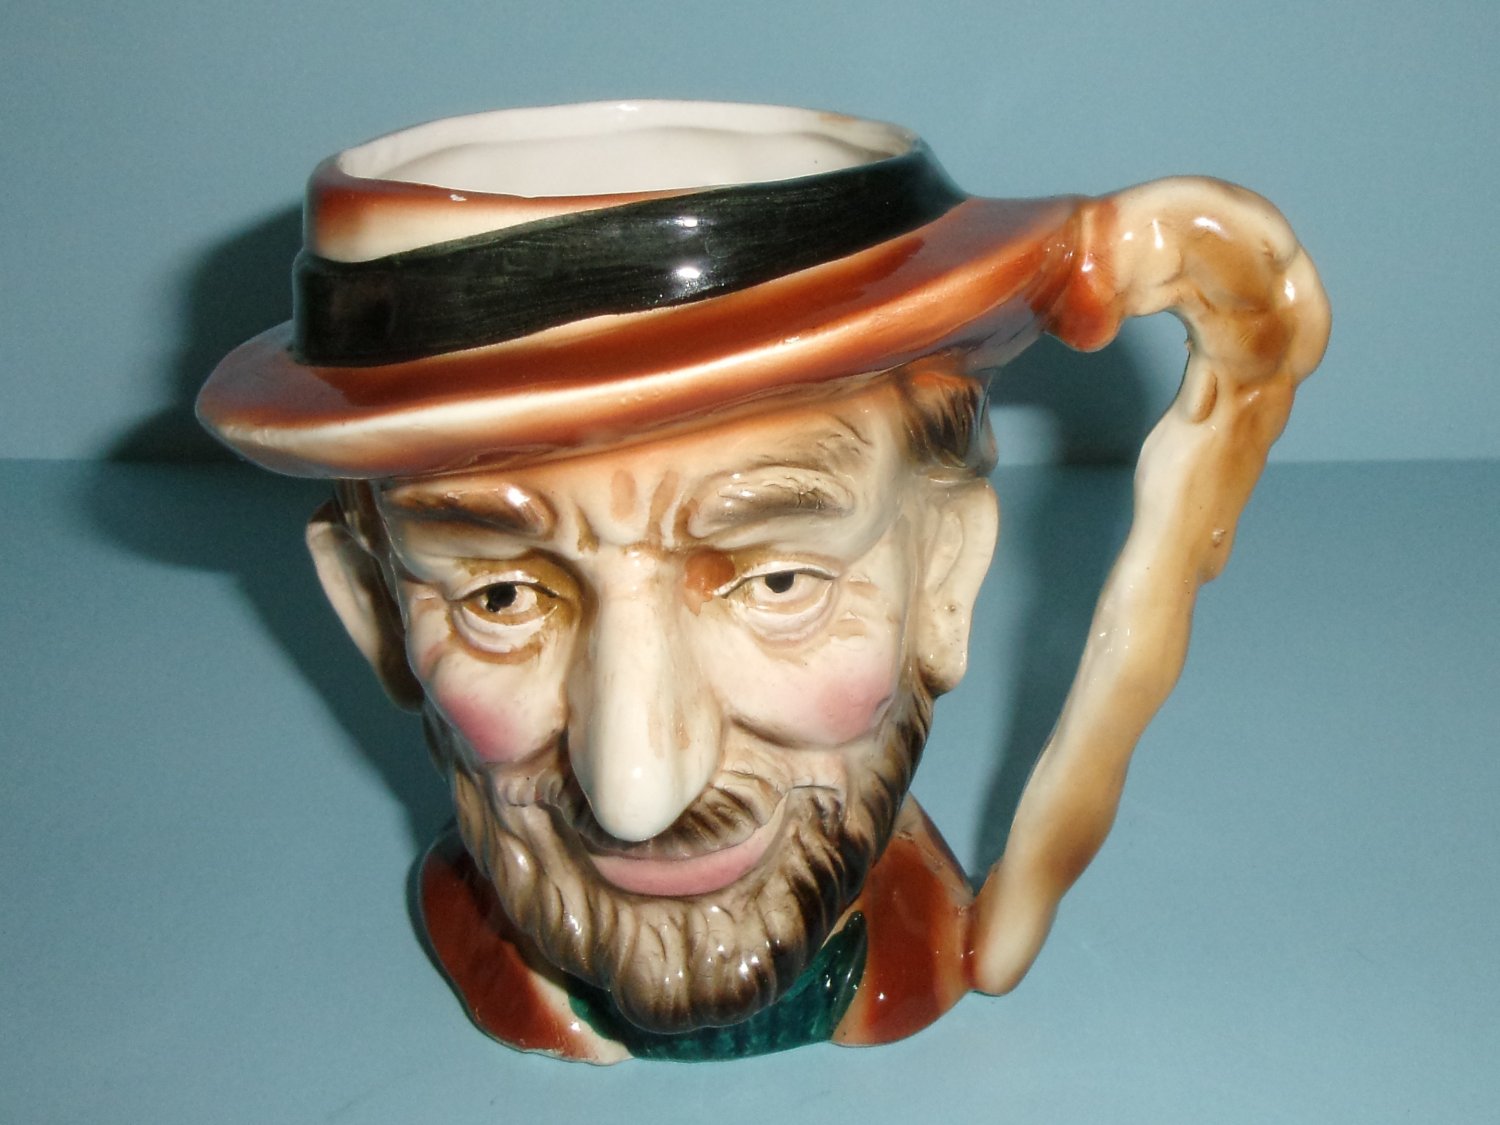 Vintage Disneyland  New Orleans Square Toby Style Man Mug With Paper Price Sticker